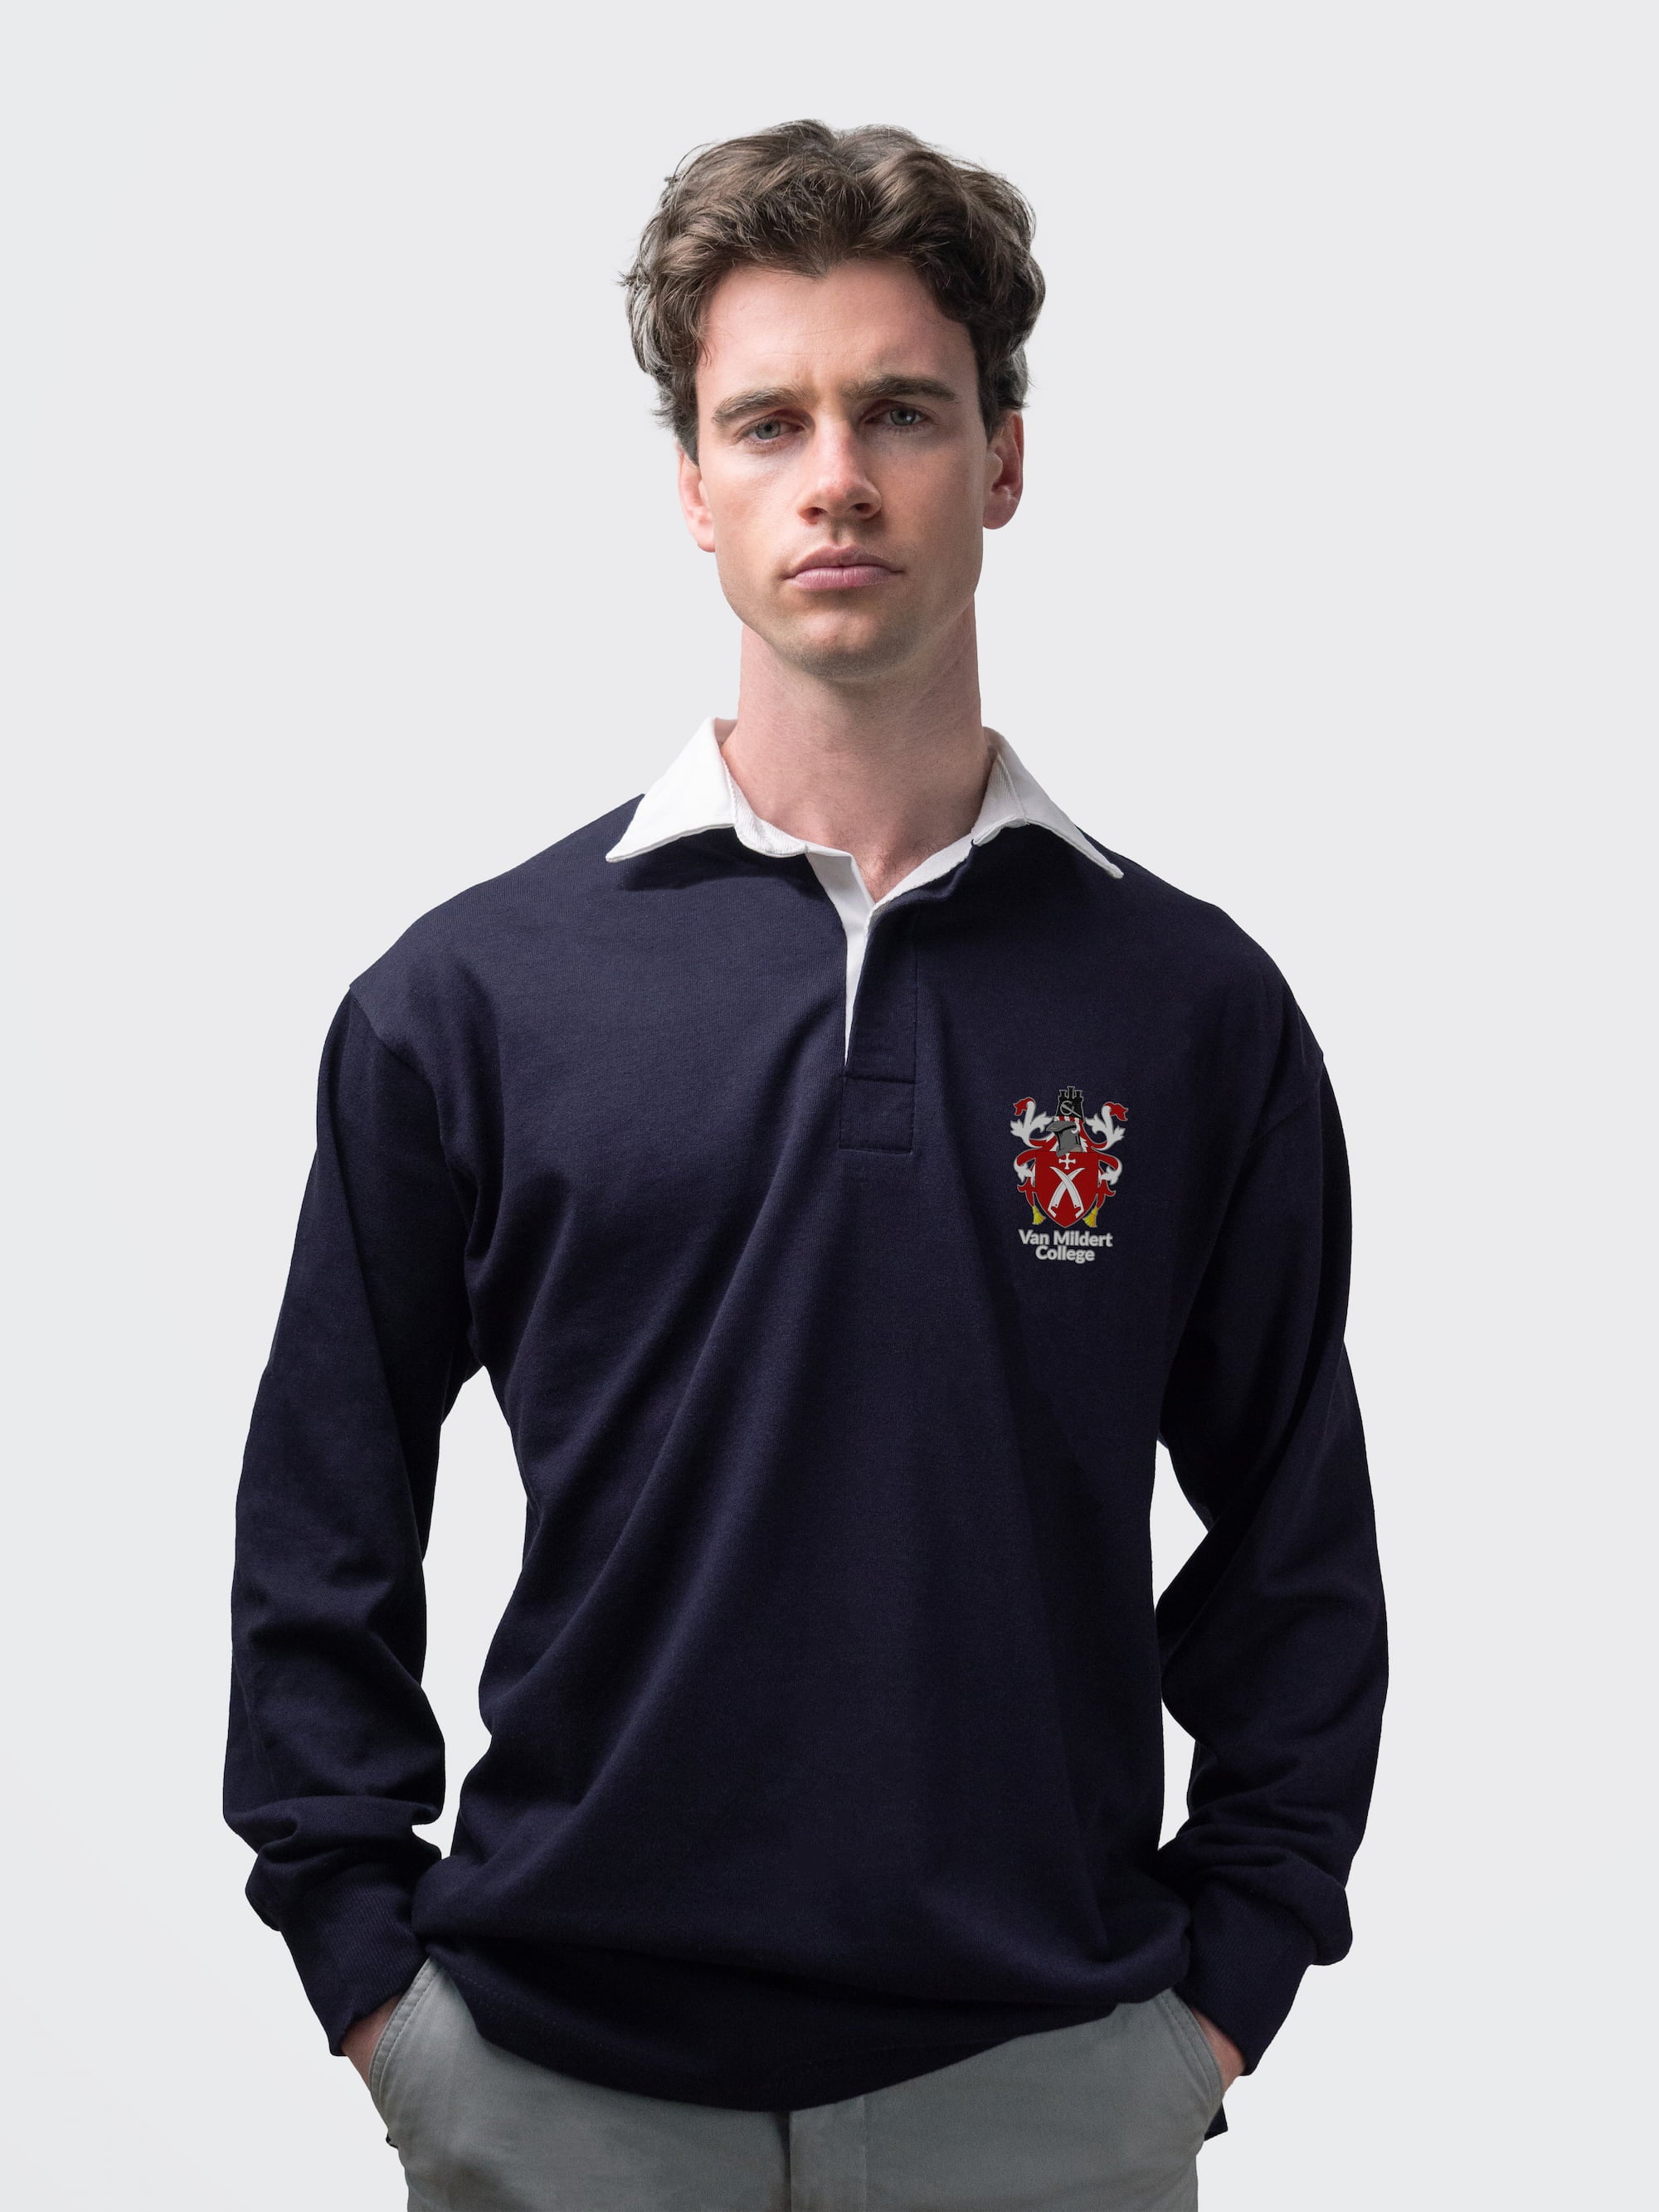 Van Mildert student wearing an embroidered mens rugby shirt in navy